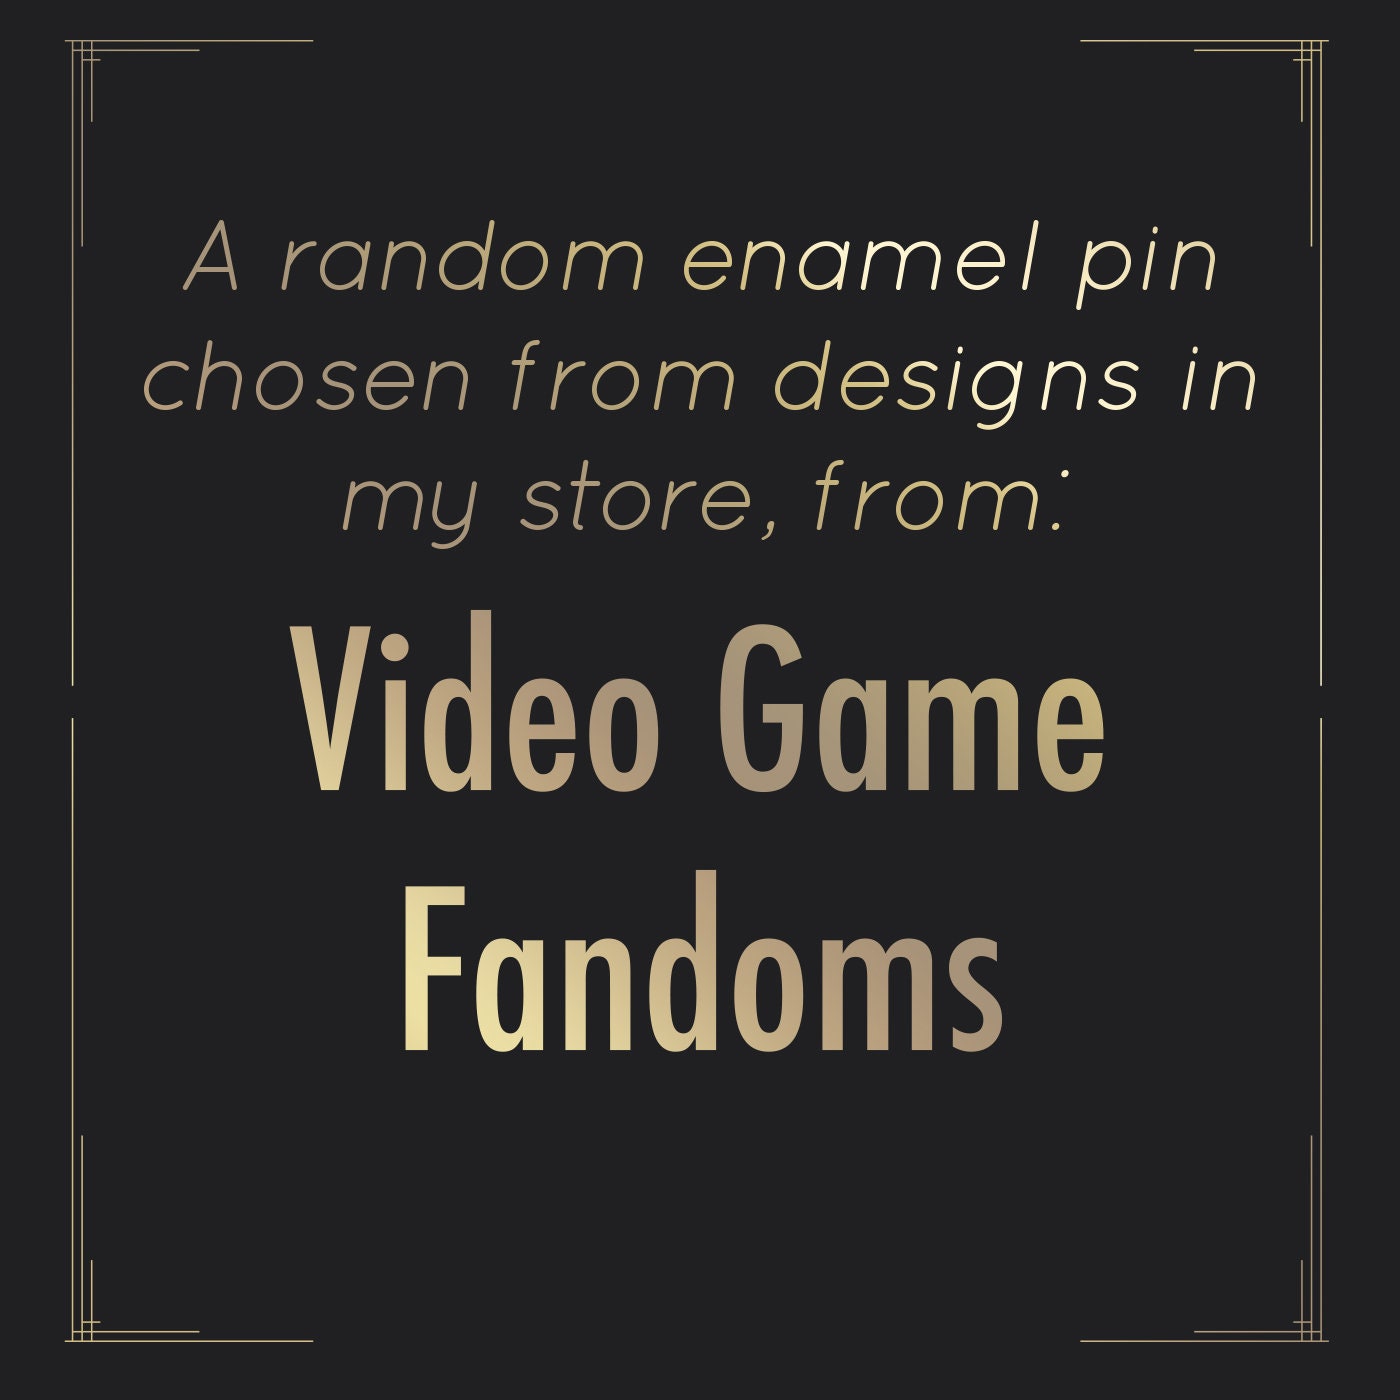 Pin on My video games